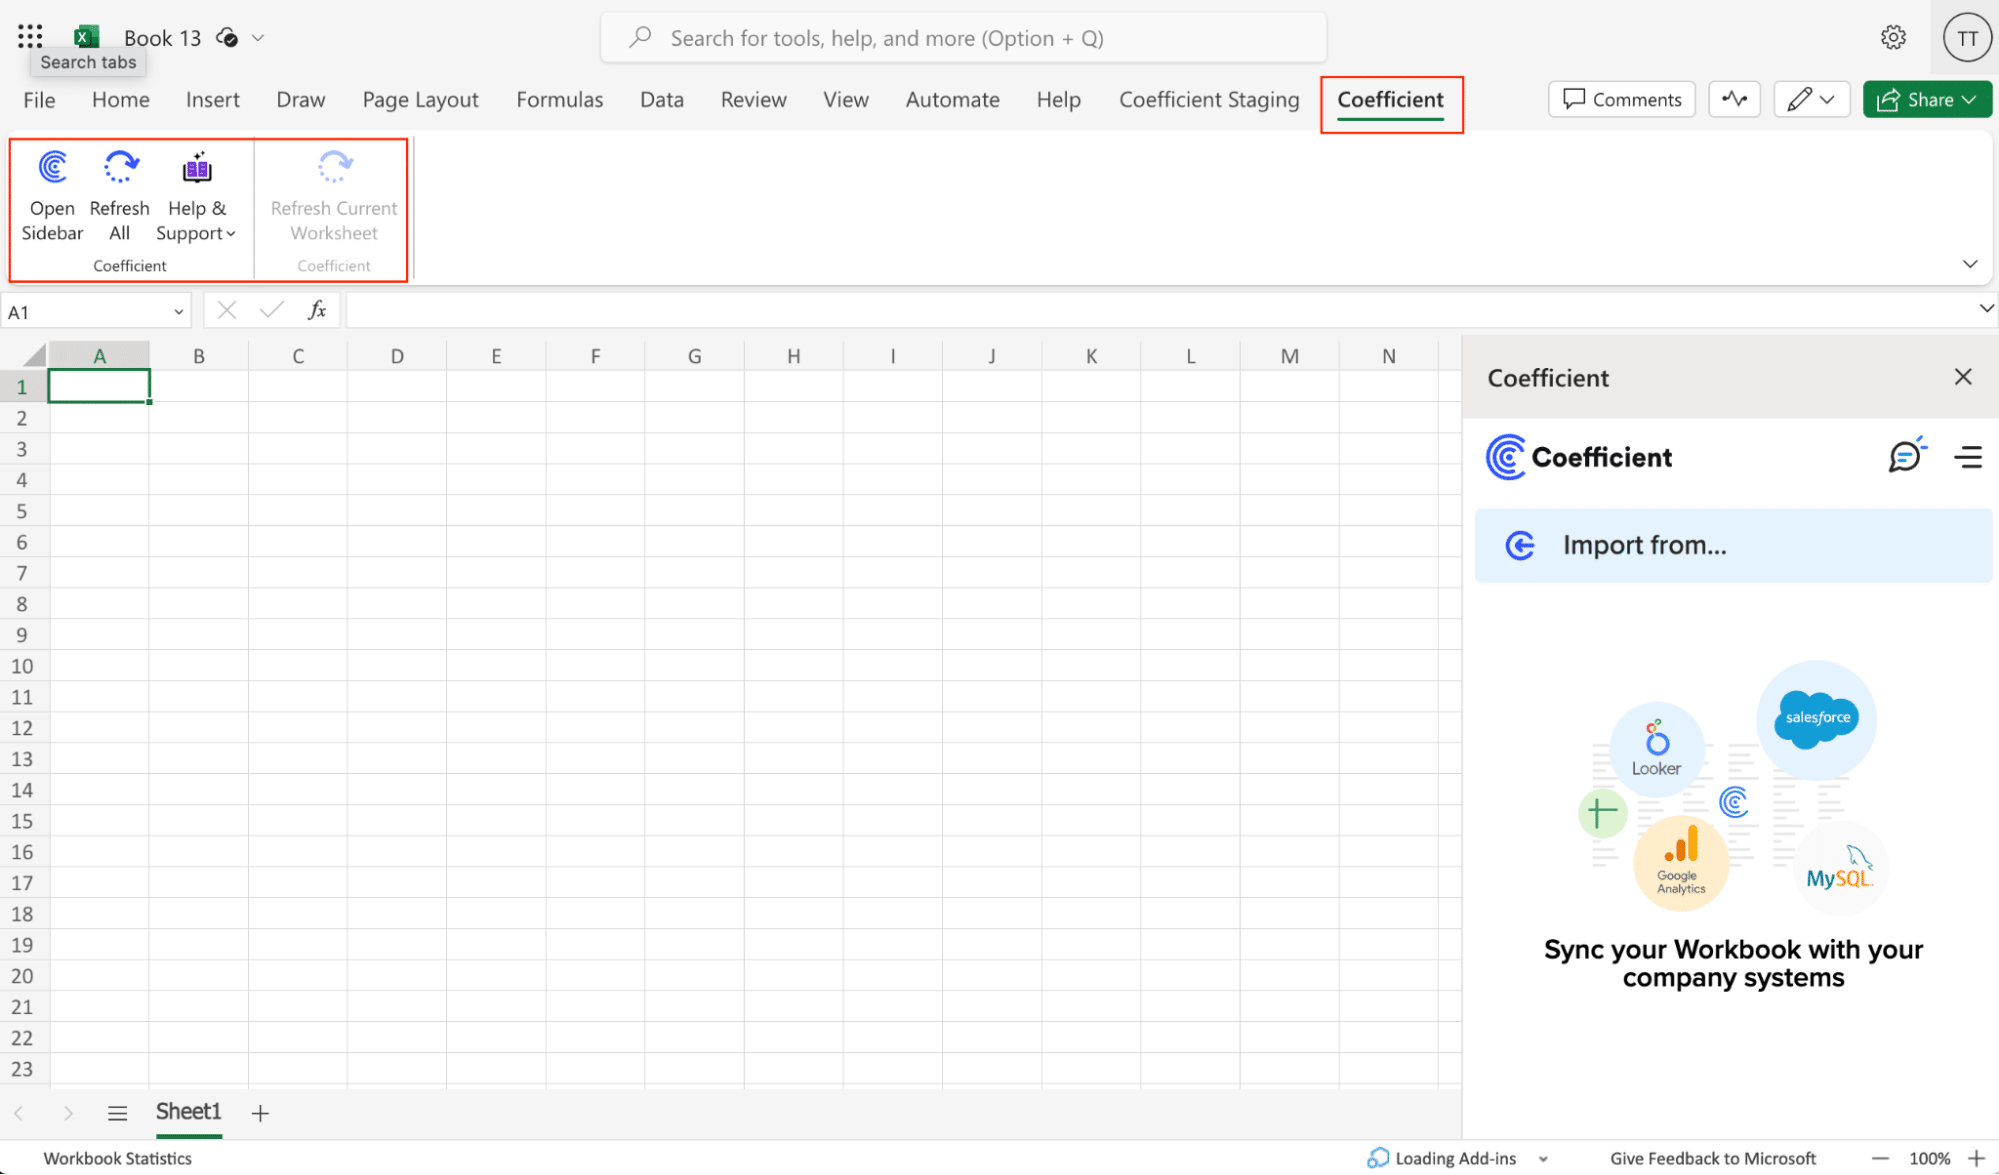 Coefficient tab displayed in Excel's top navigation bar after successful installation